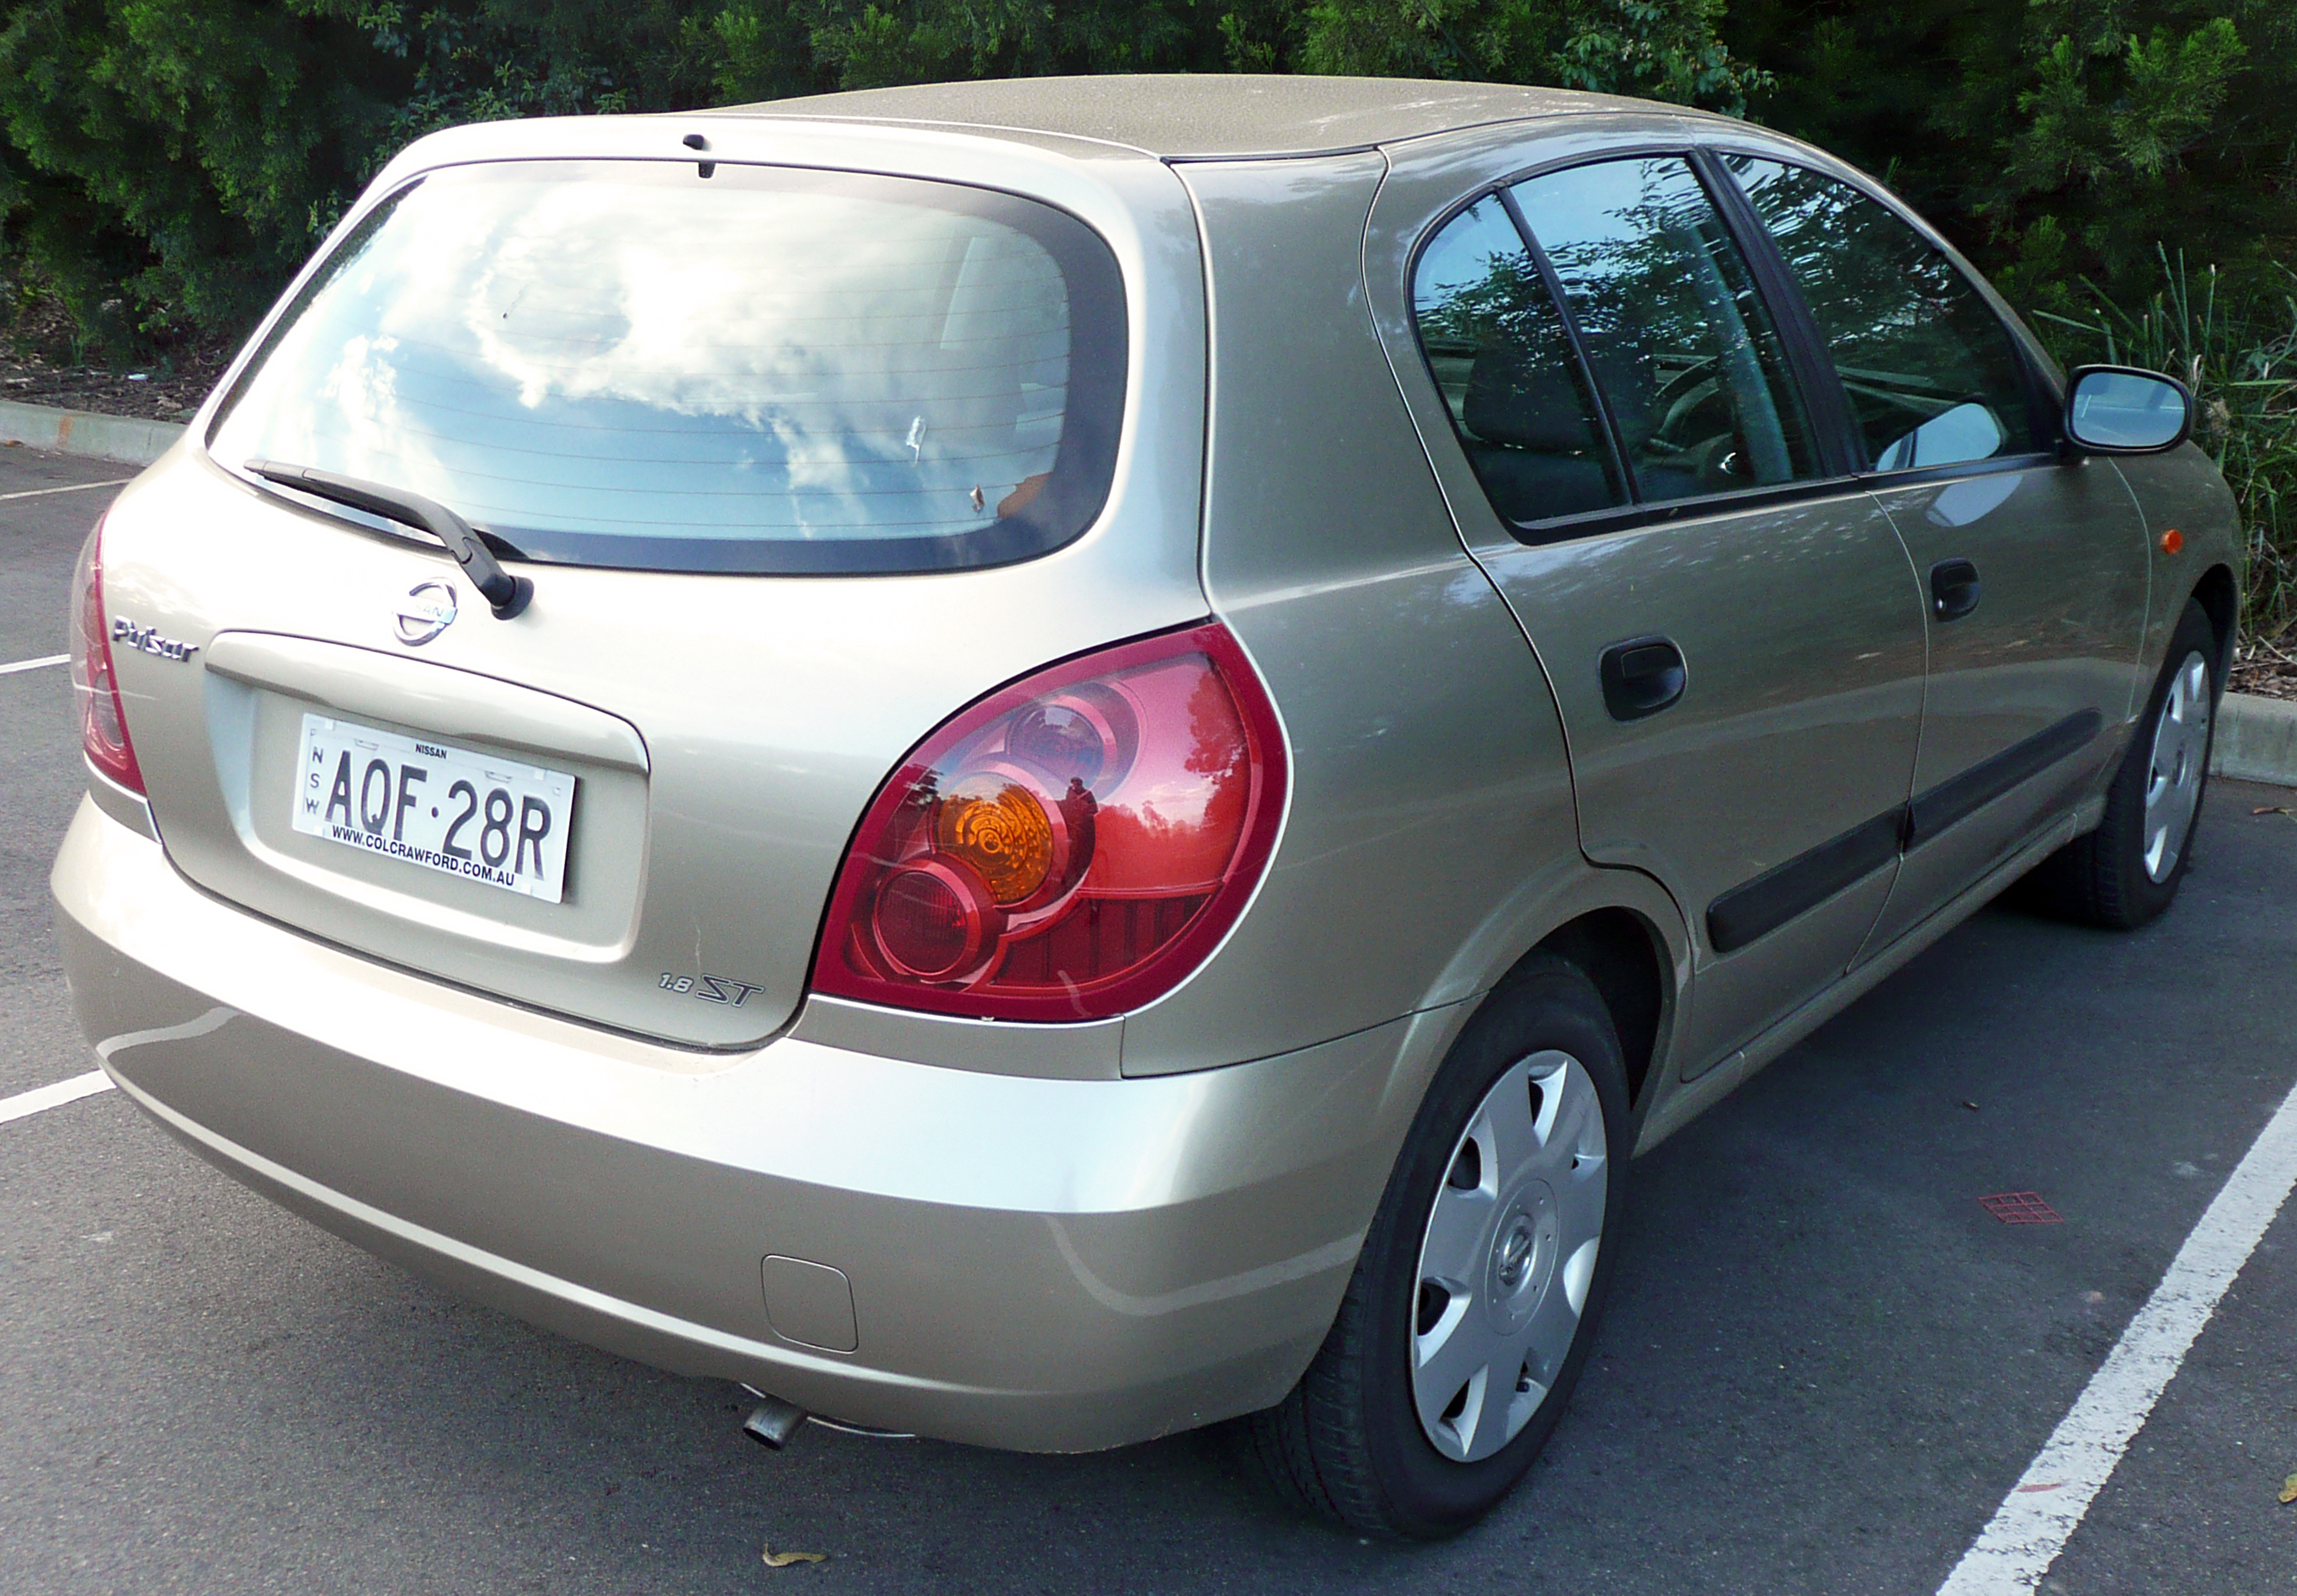 2005 Nissan pulsar n16 st review #1